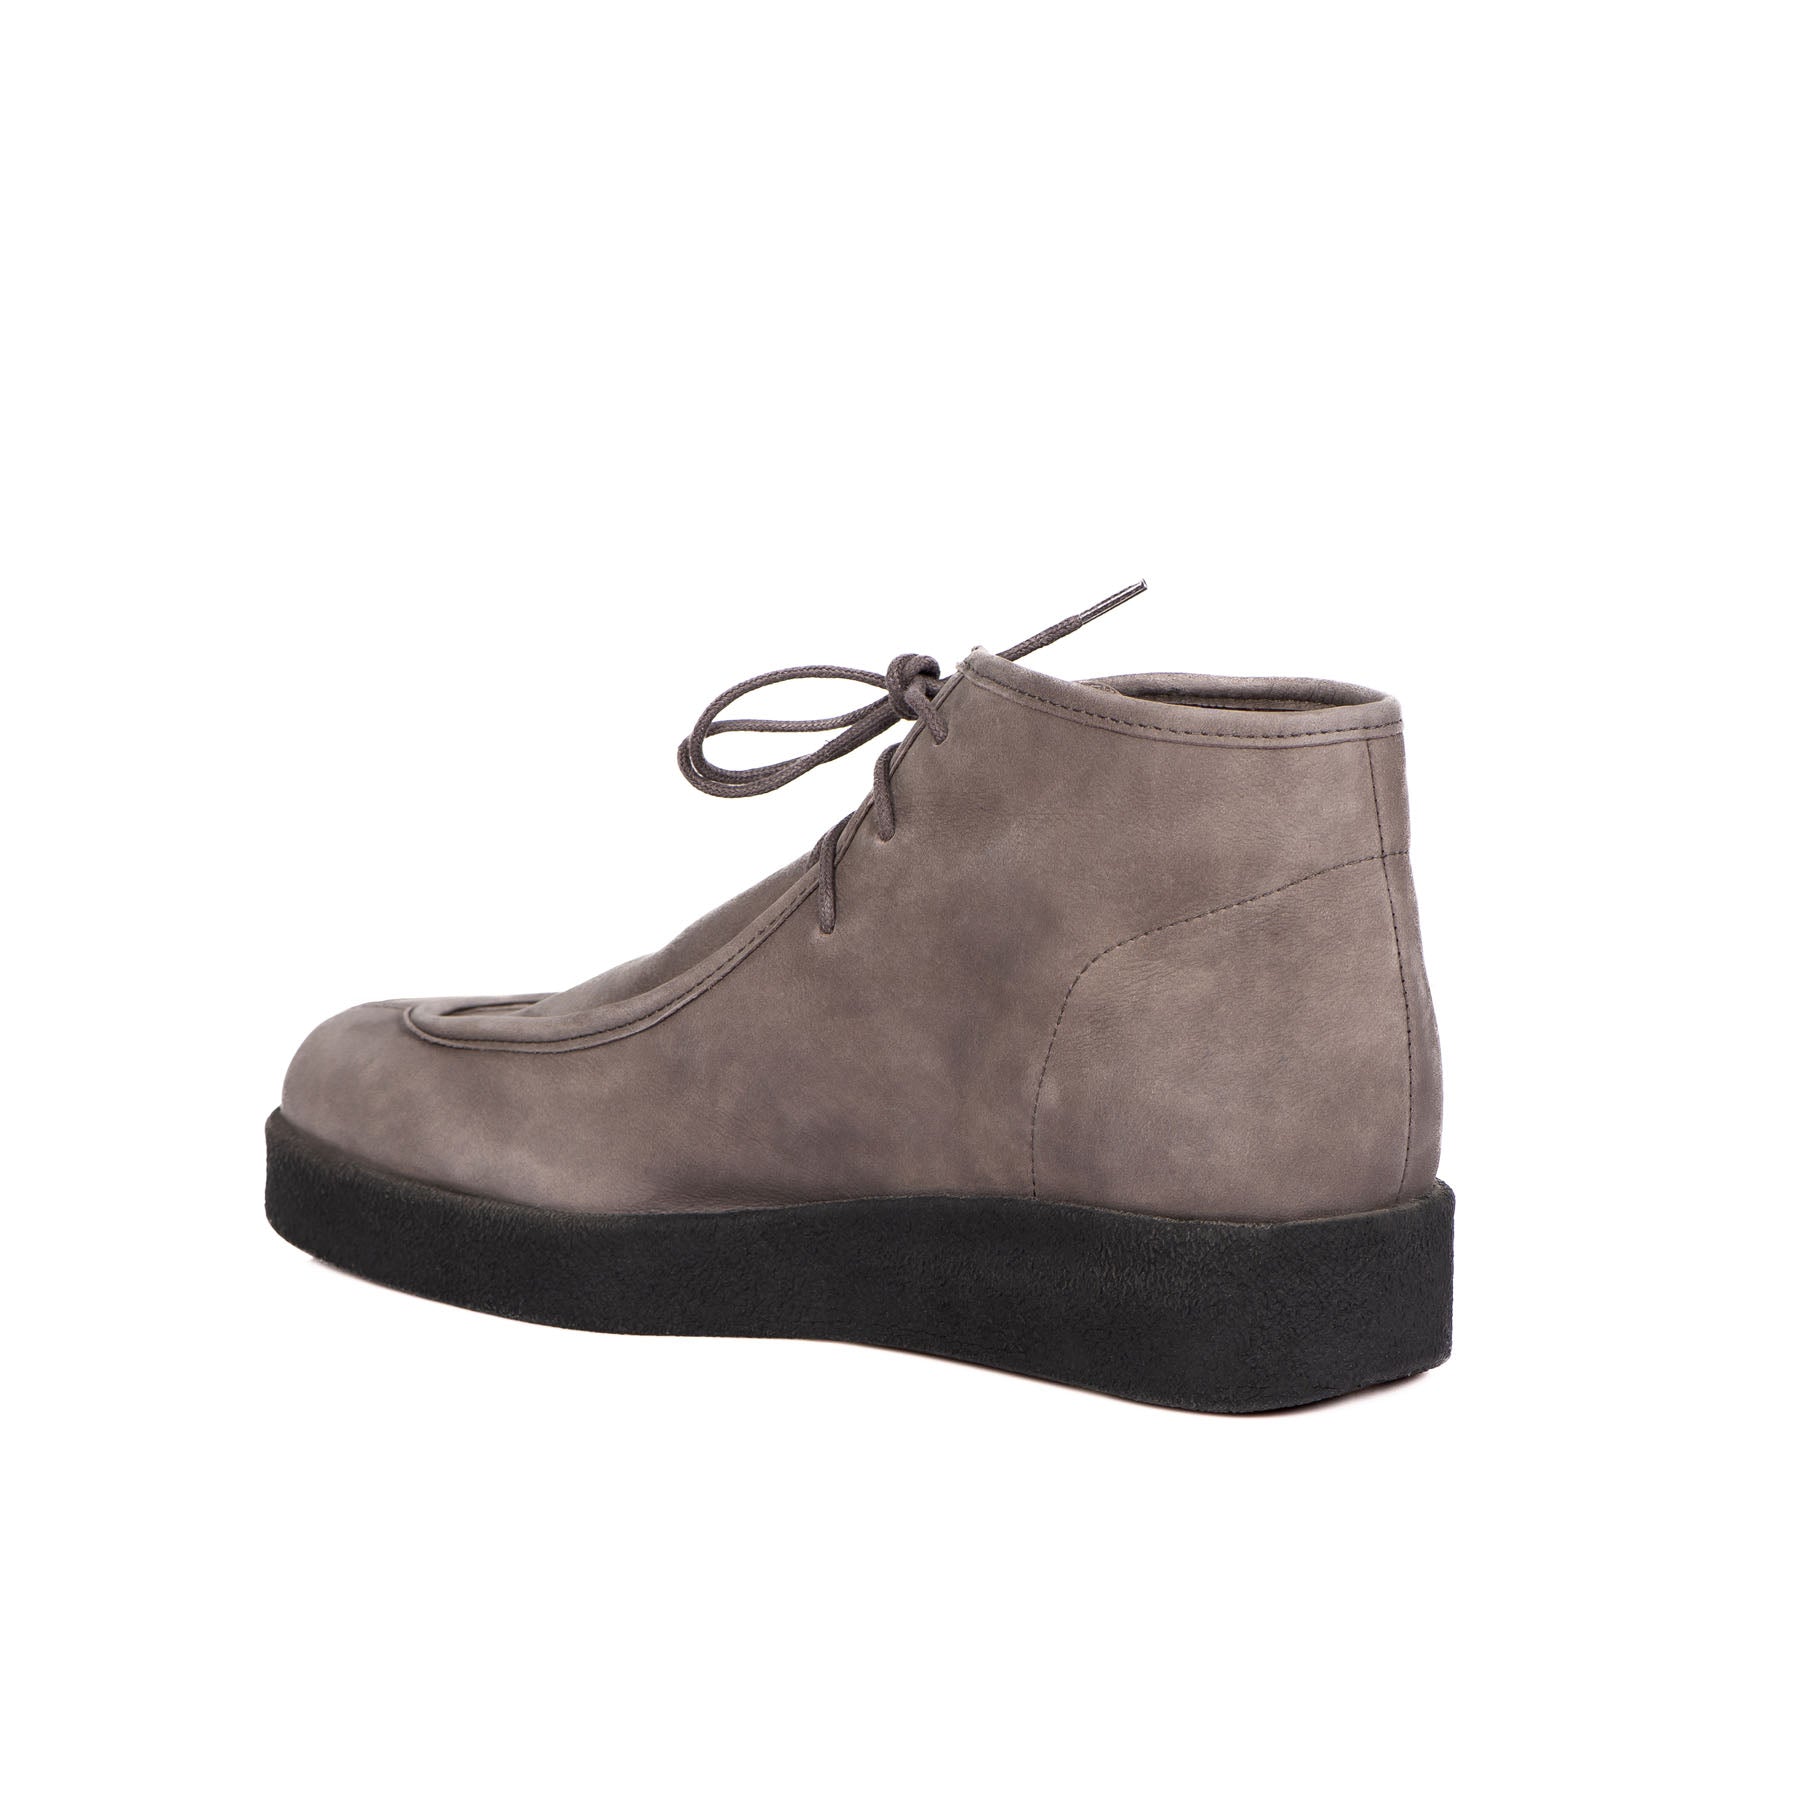 Chic & Simple Arche Boots Comell - Storm